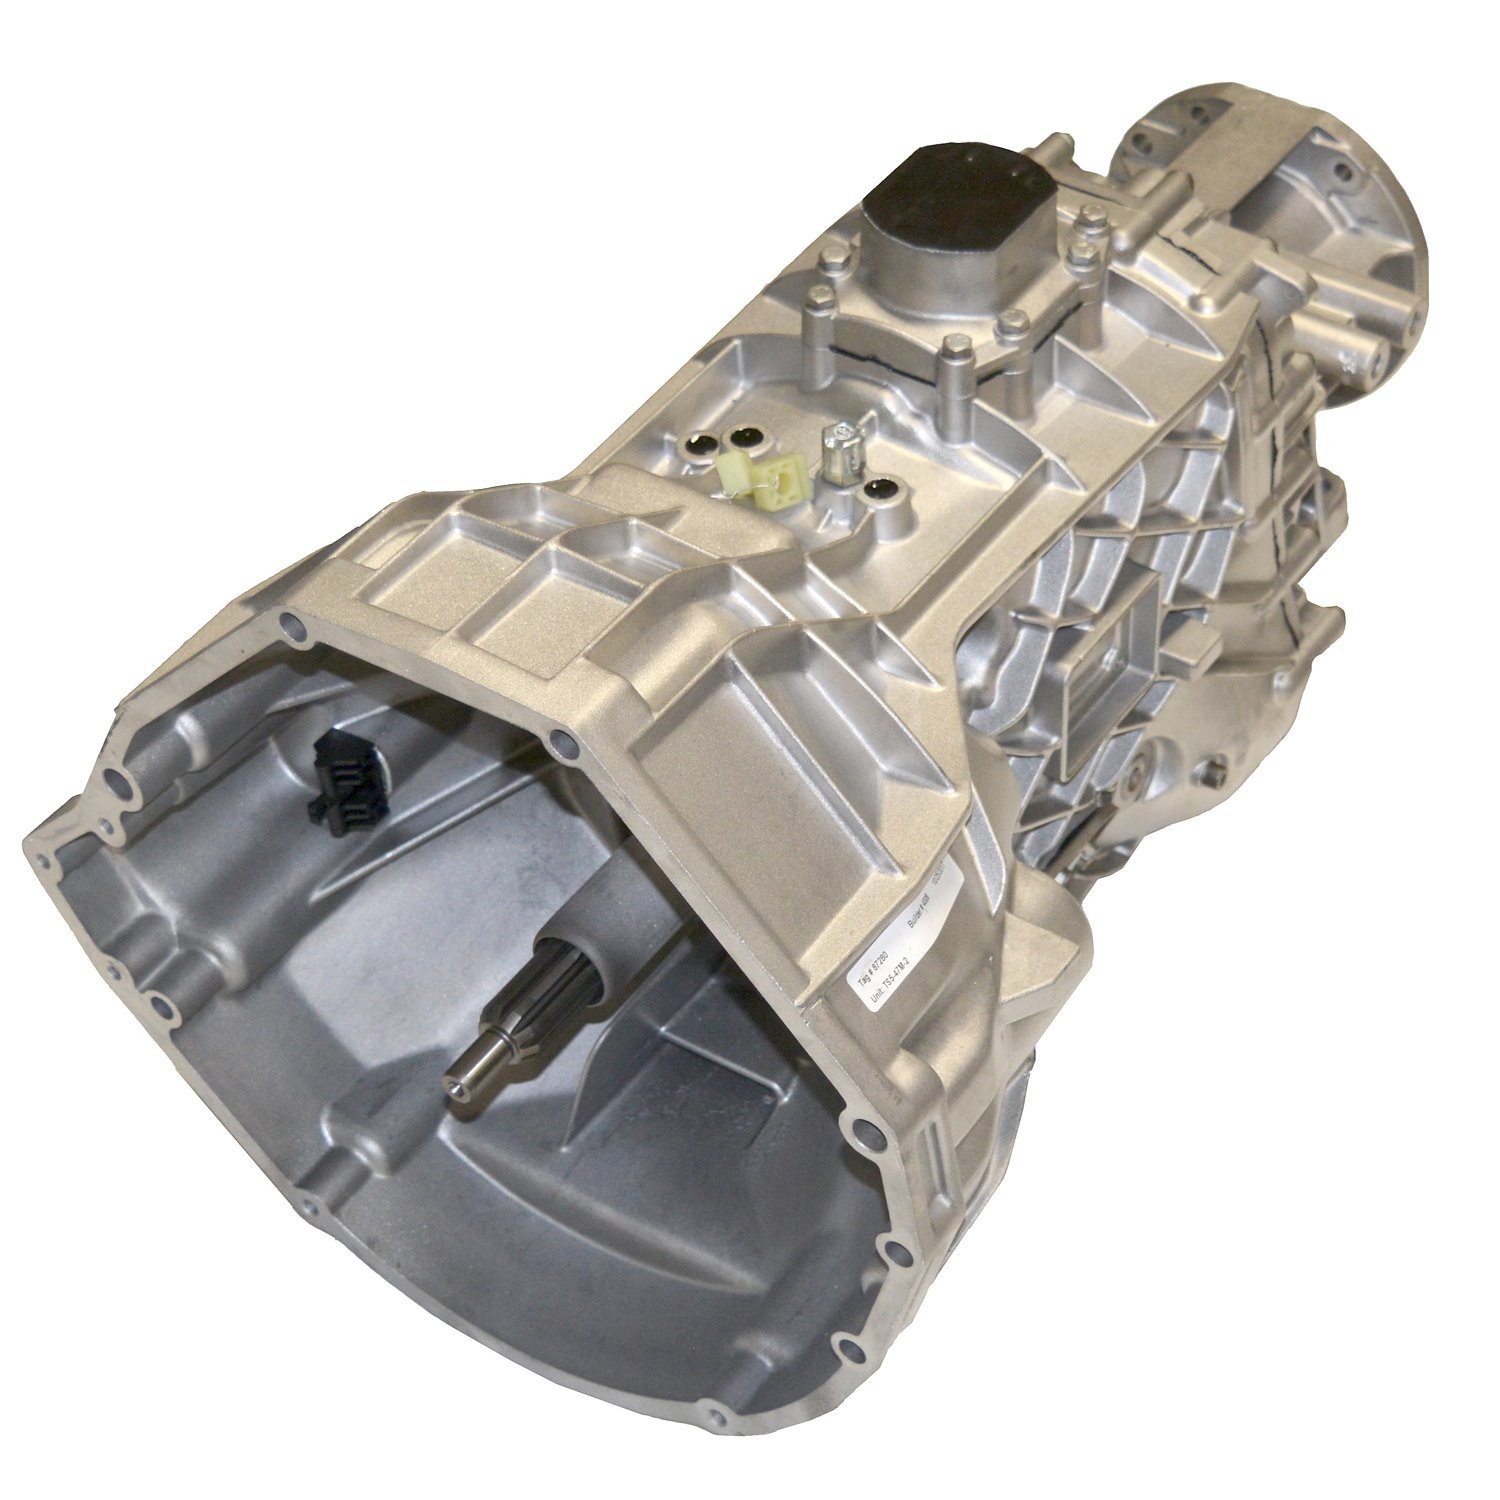 Remanufactured S5-47 Manual Transmission for Ford 1999 F-series 5.4L & 6.8L, 4x4, 5 Speed